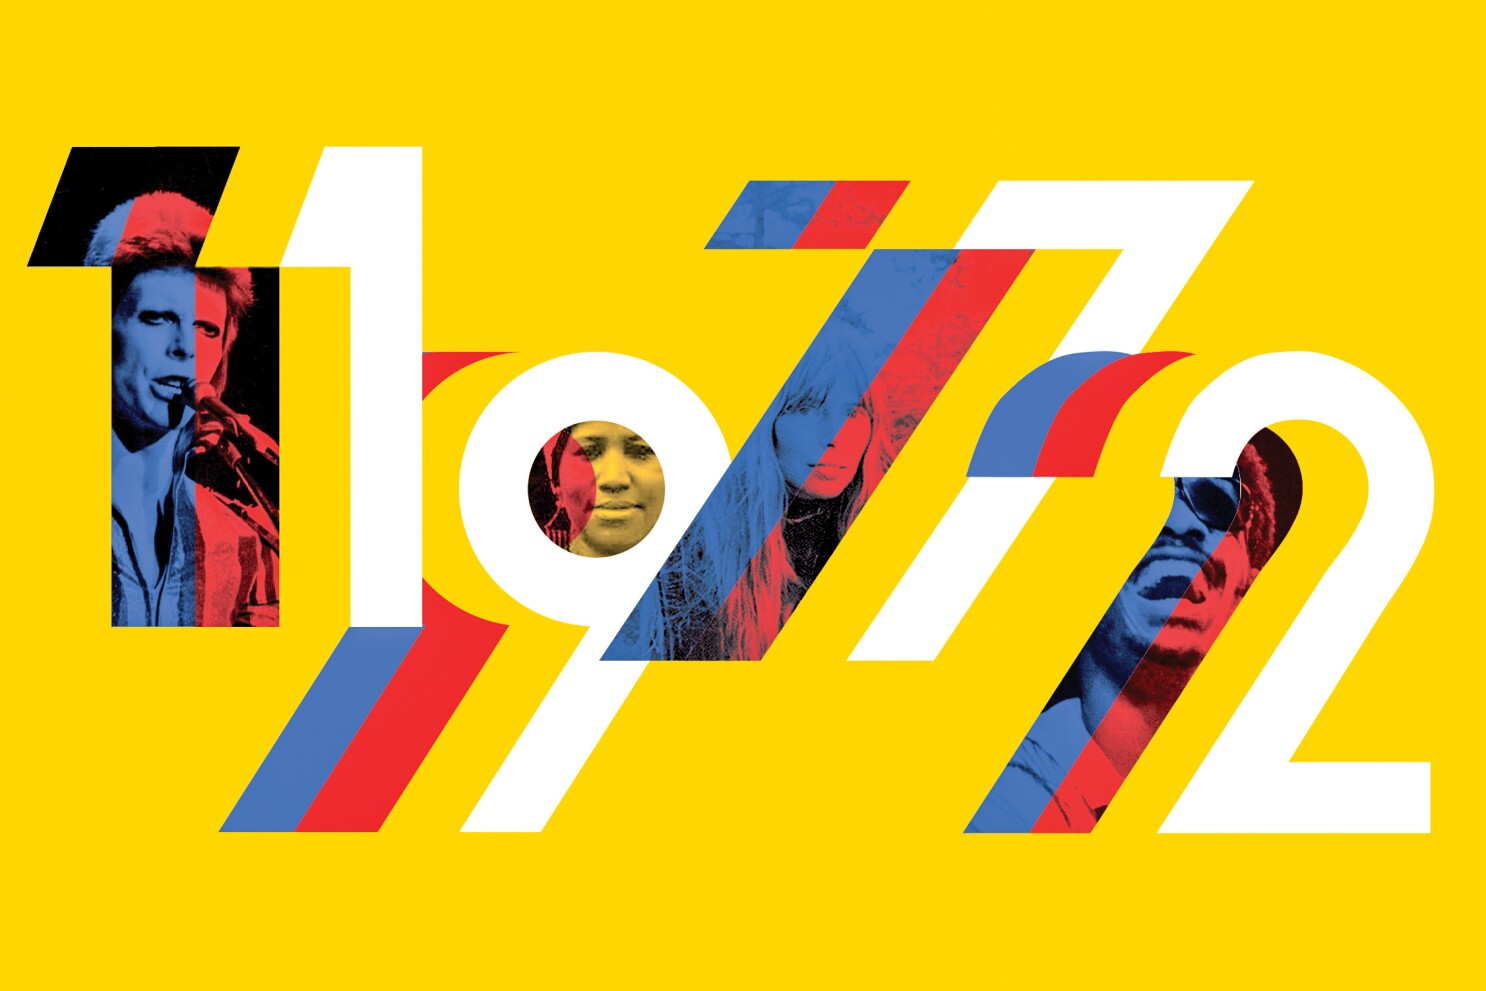 The year 1972 with images of David Bowie, Aretha Franklin, and Stevie Wonder